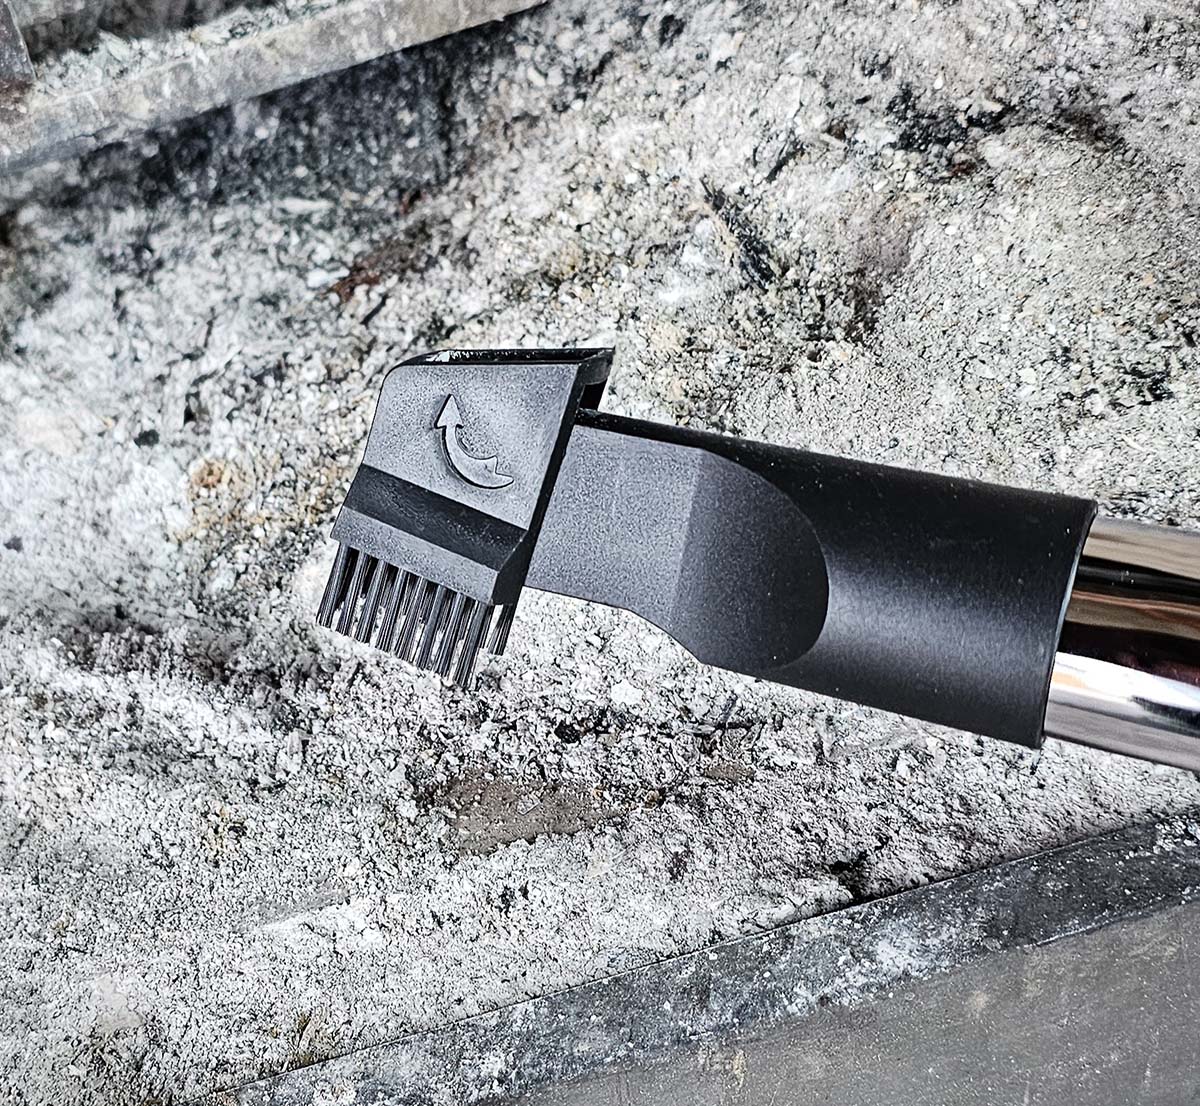 The brush attachment of the PowerSmith ash vacuum in front of a pile of ashes in a firebox.